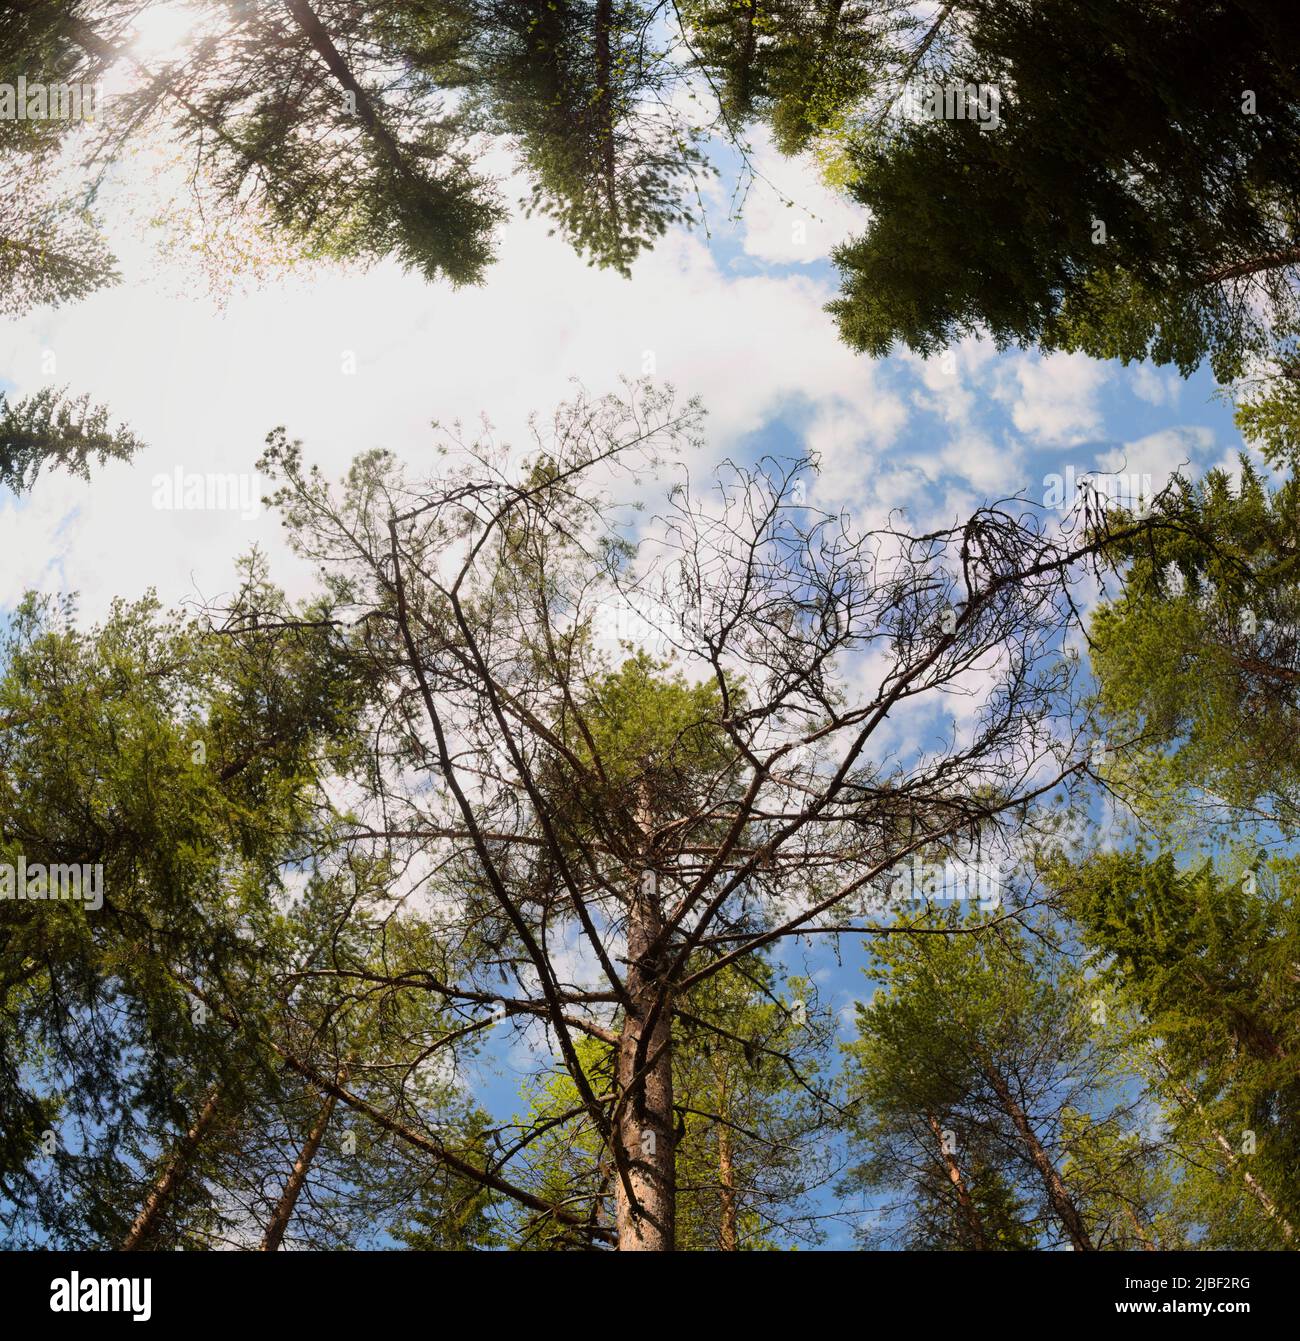 Upward view of a mighty pine in the Swedish forest. Stock Photo